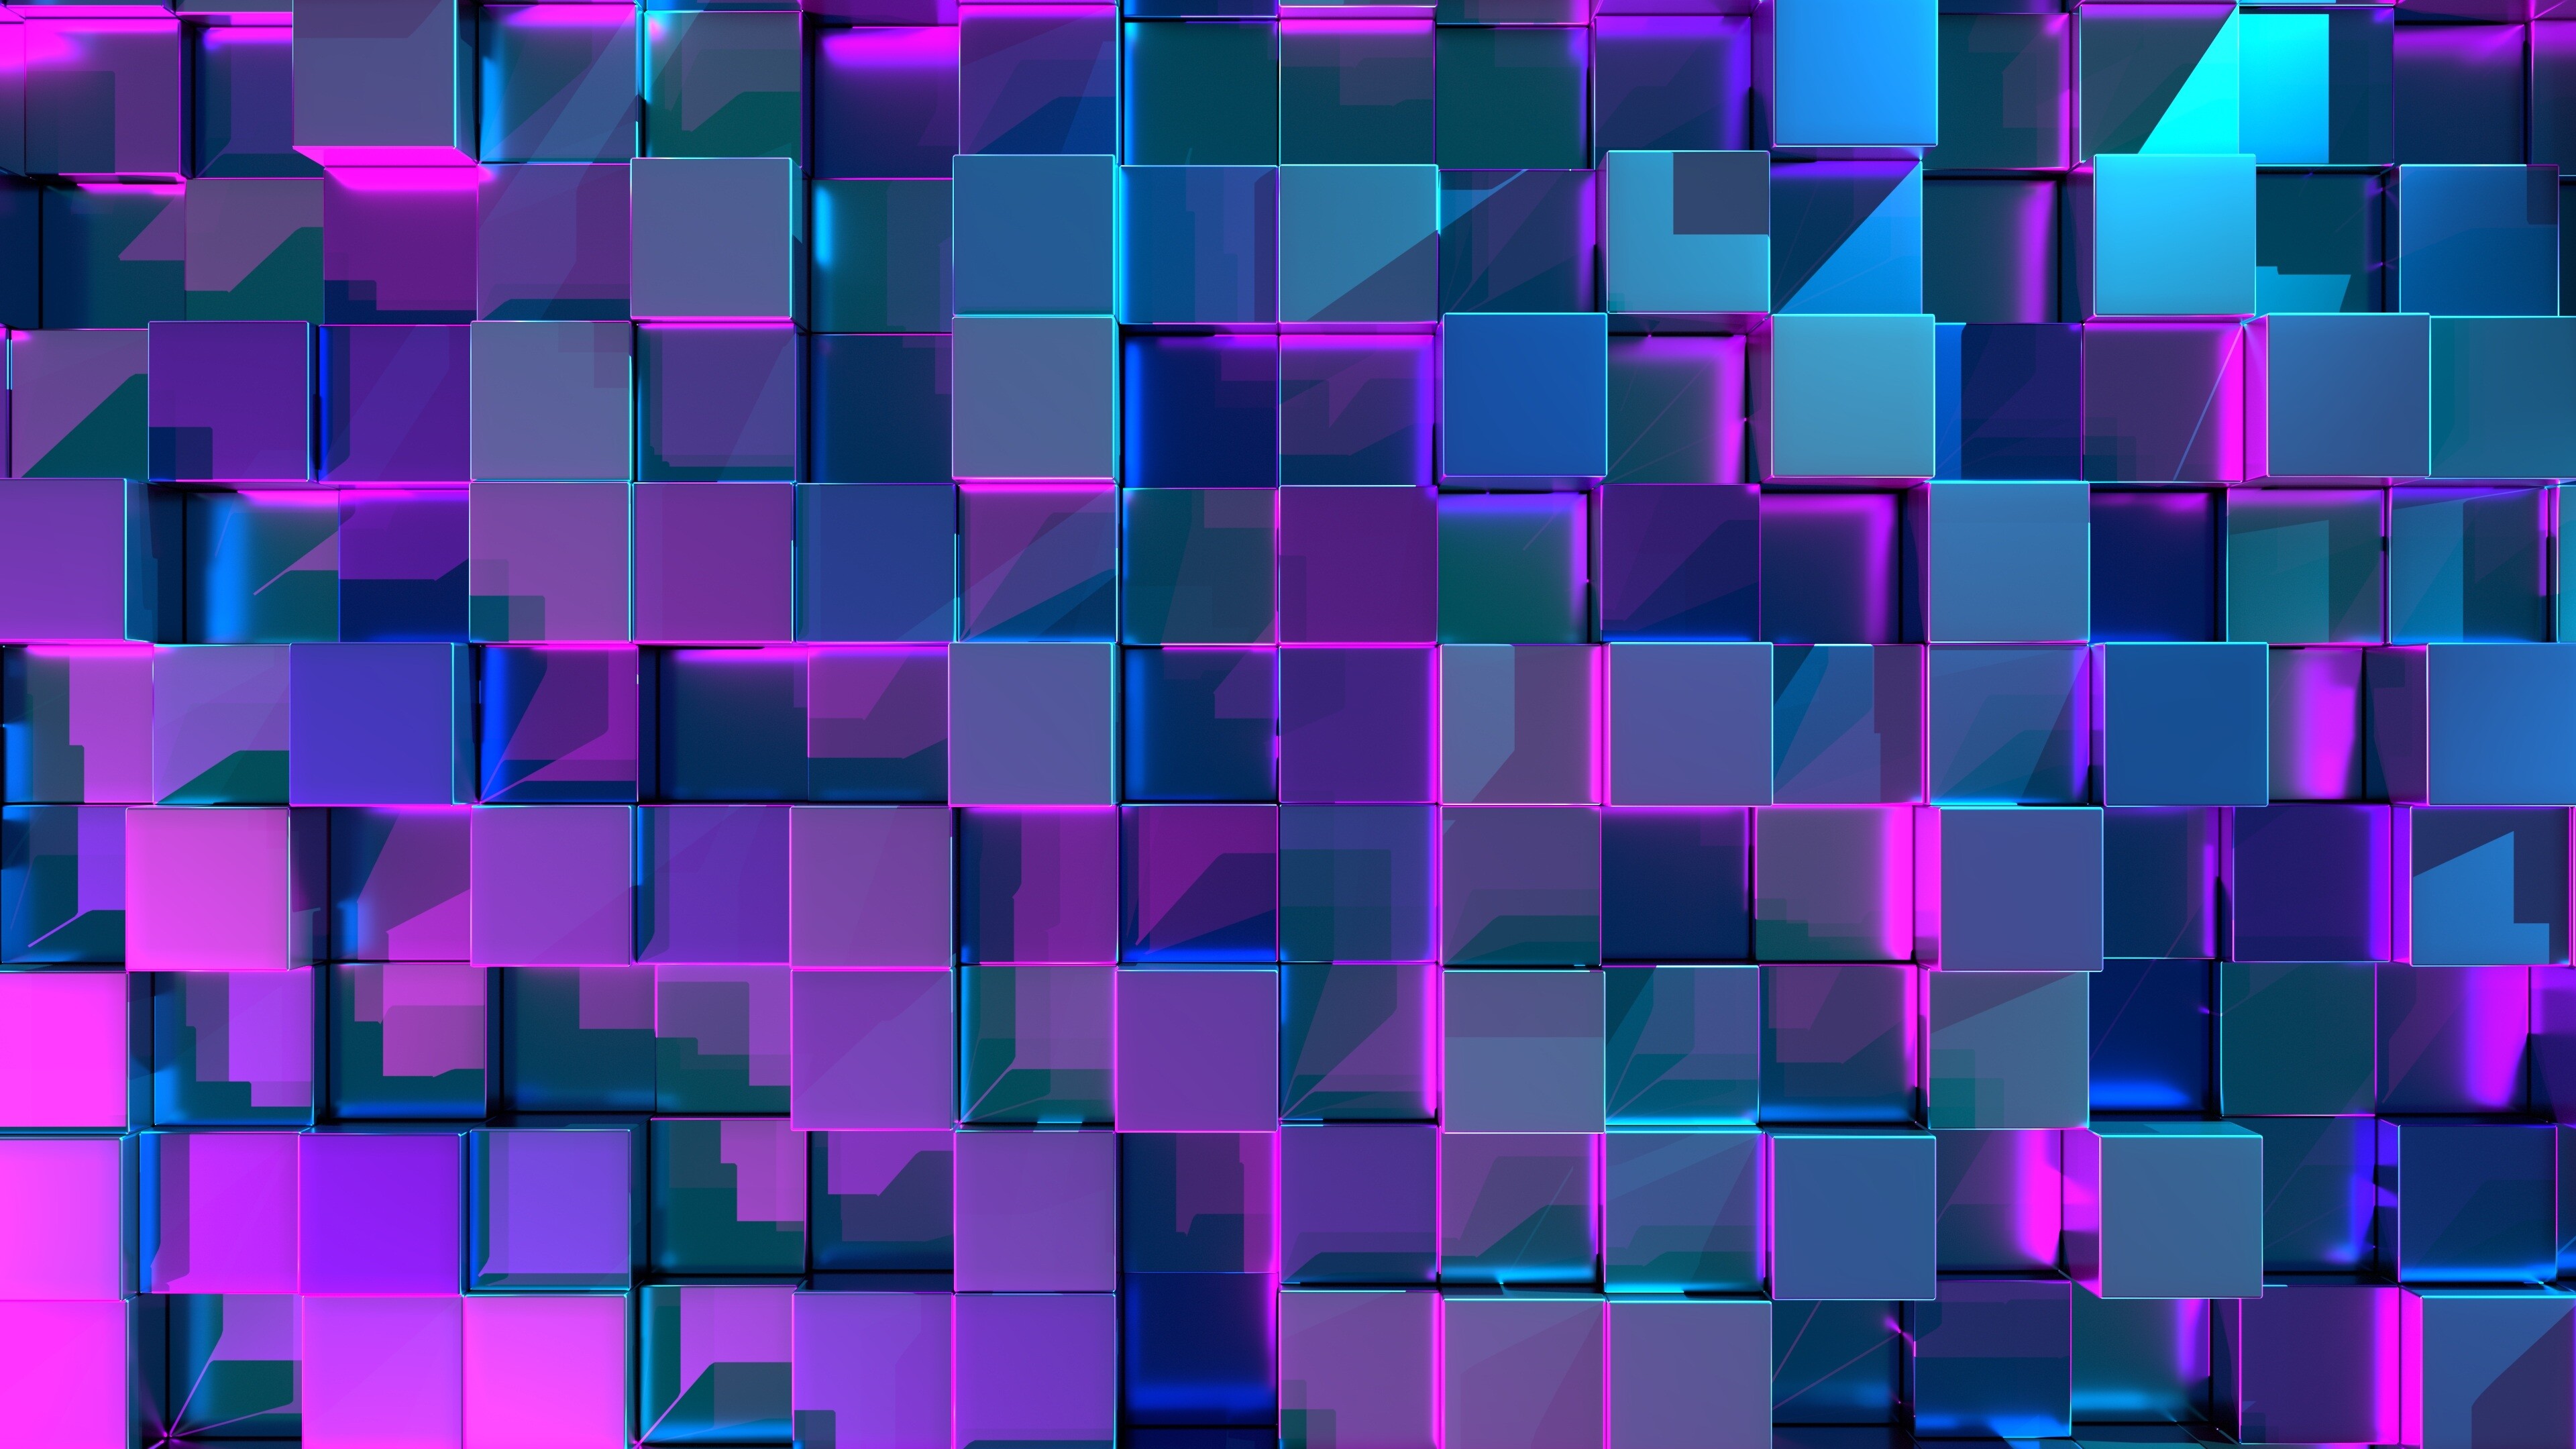 Geometry: Three-dimensional neon cubes, Abstract, Right angles. 3840x2160 4K Background.